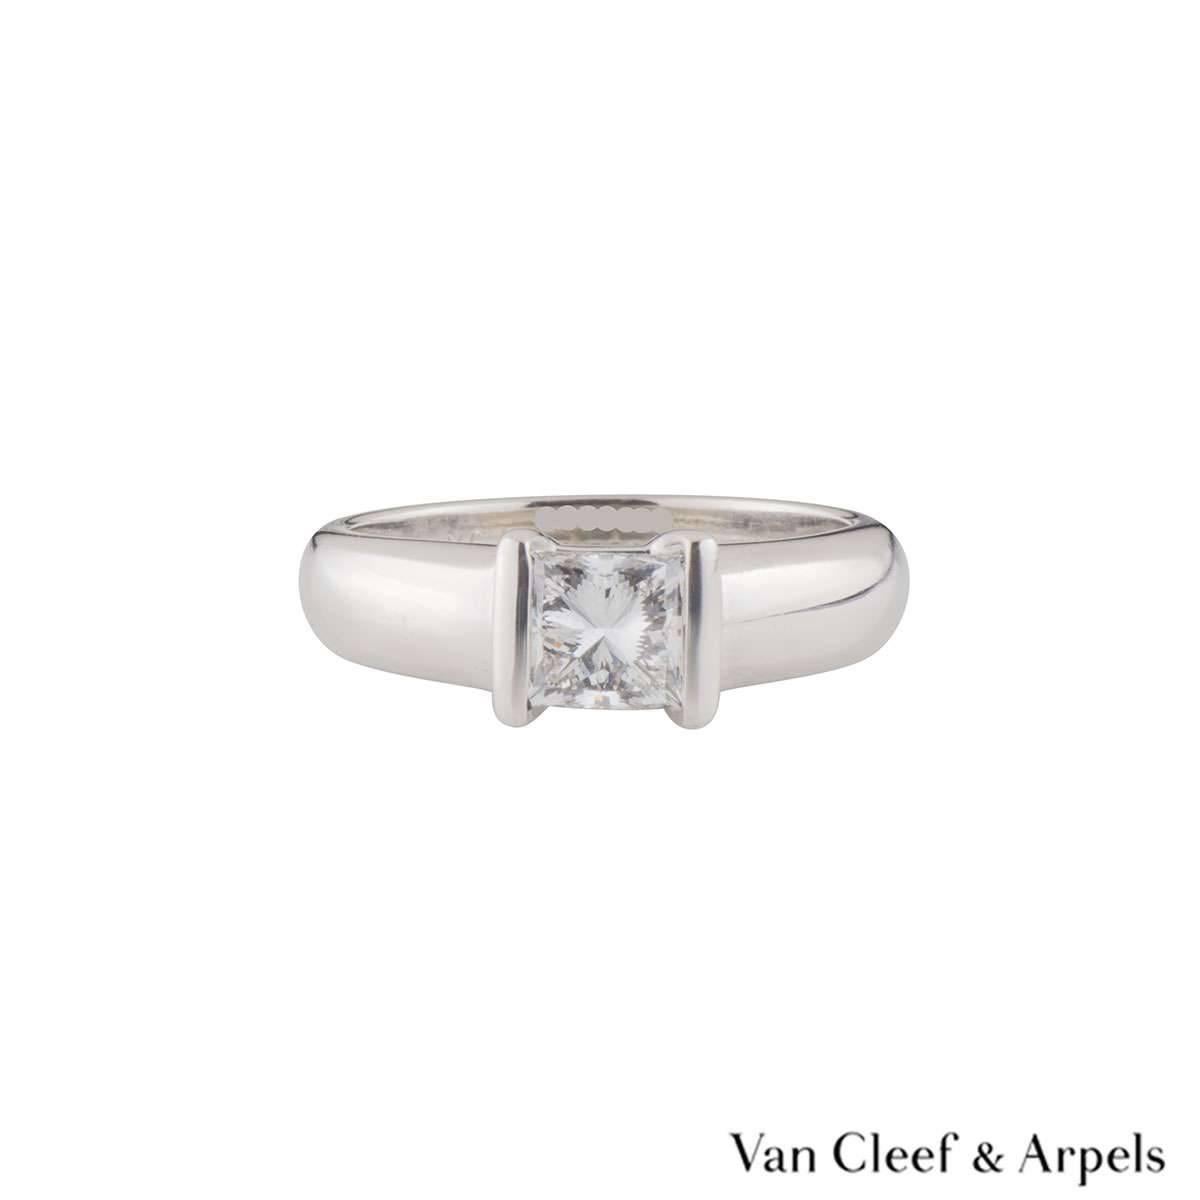 A beautiful 18k white gold Van Cleef & Arpels diamond engagement ring. The ring comprises of a princess cut diamond in a tension setting with a weight of 1.01ct, E colour and VVS1 clarity. The ring is a US size 6, EU size 52 and UK size M but